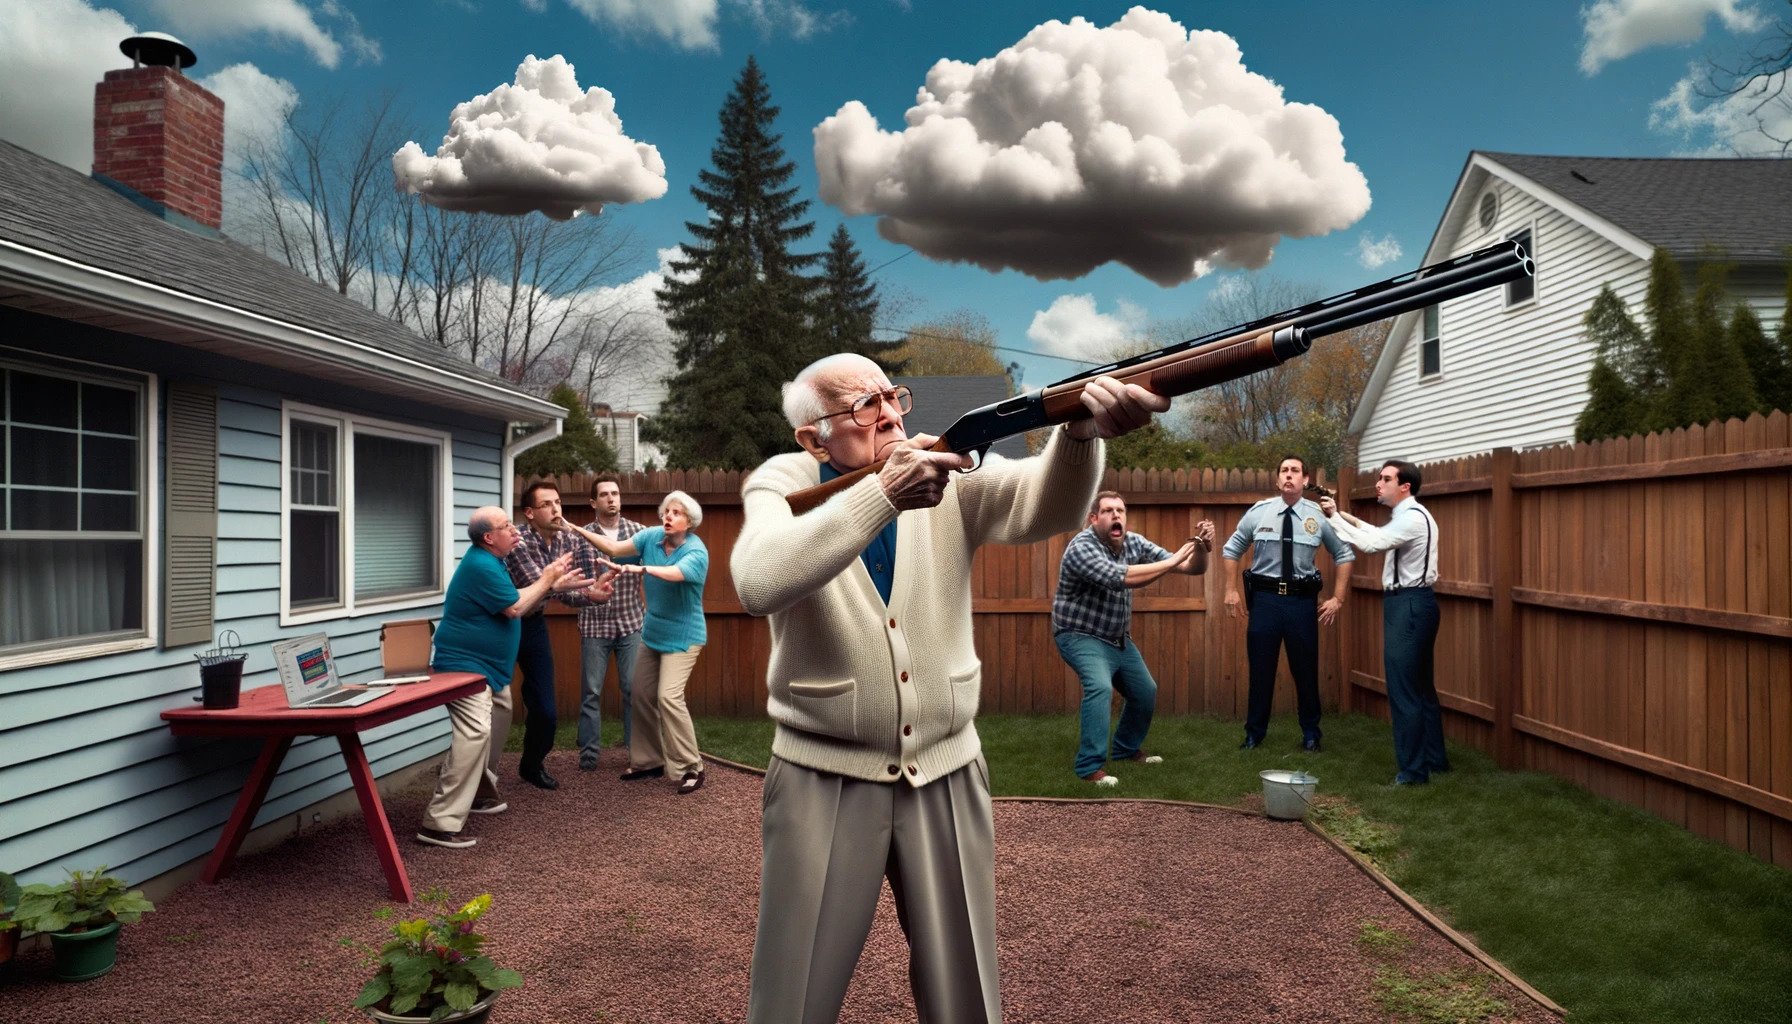 83 year old shoots cloud